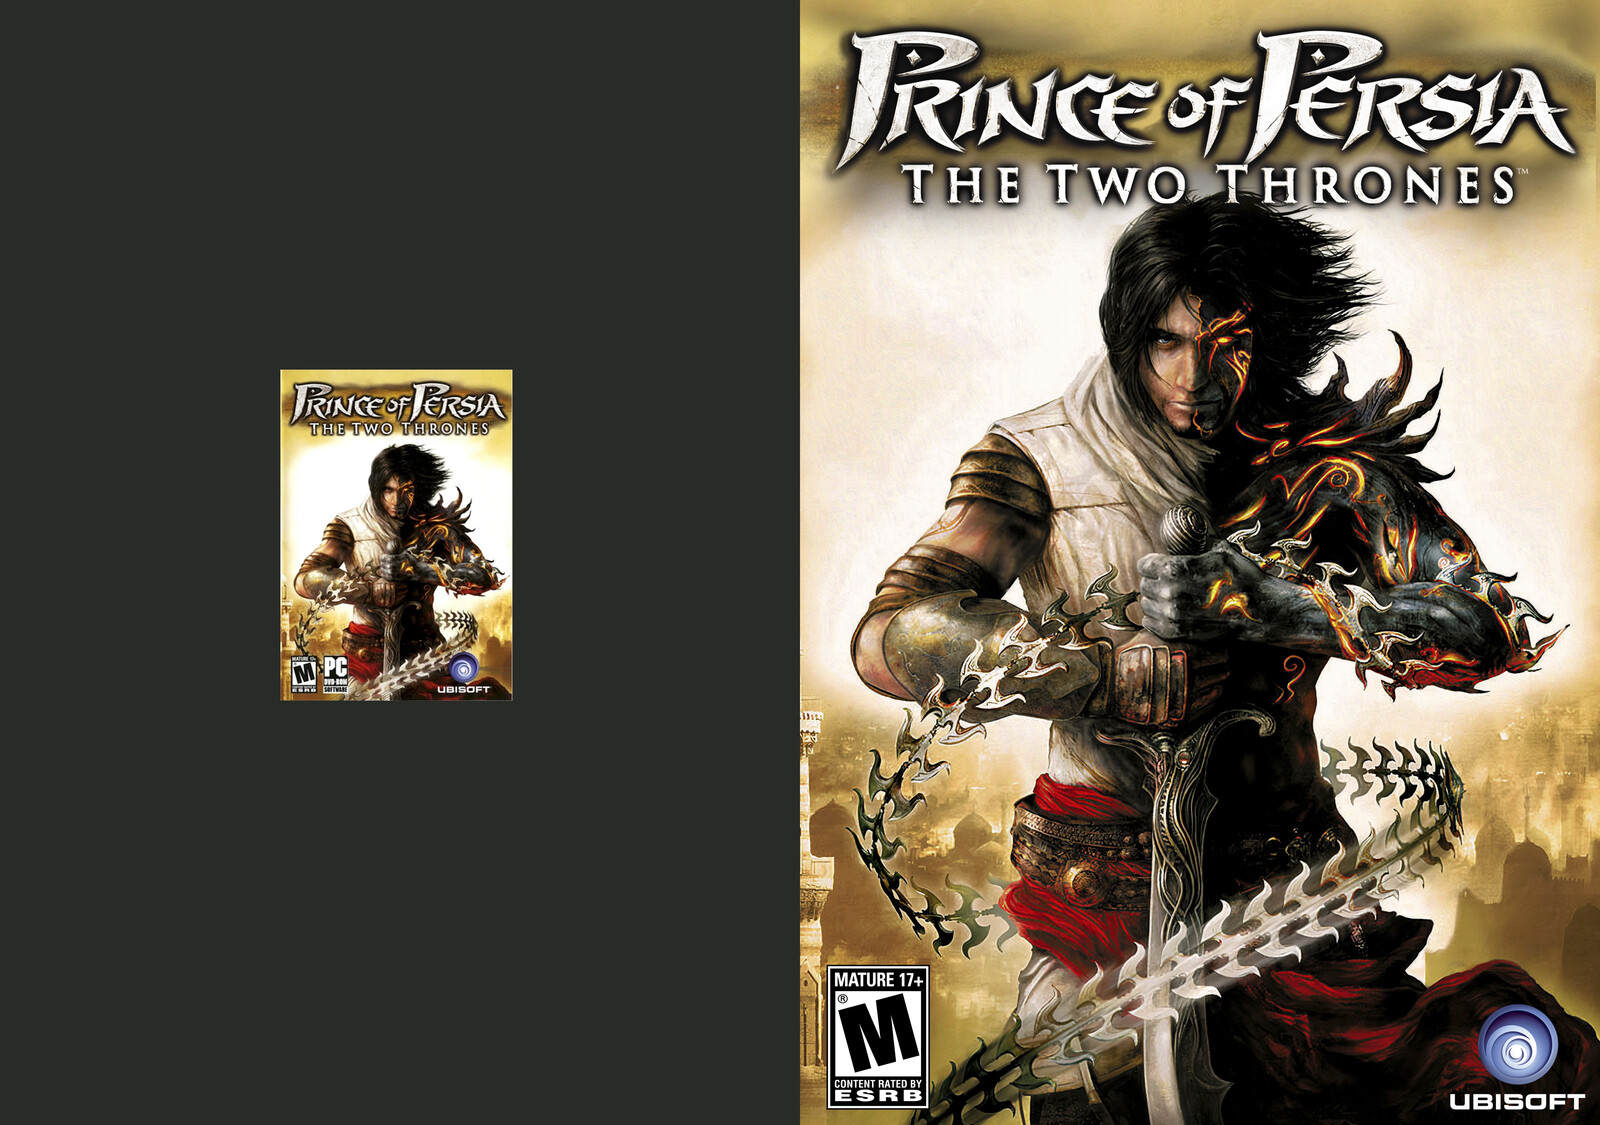 Prince of Persia: The Two Thrones (Scan vs. Upscaled)